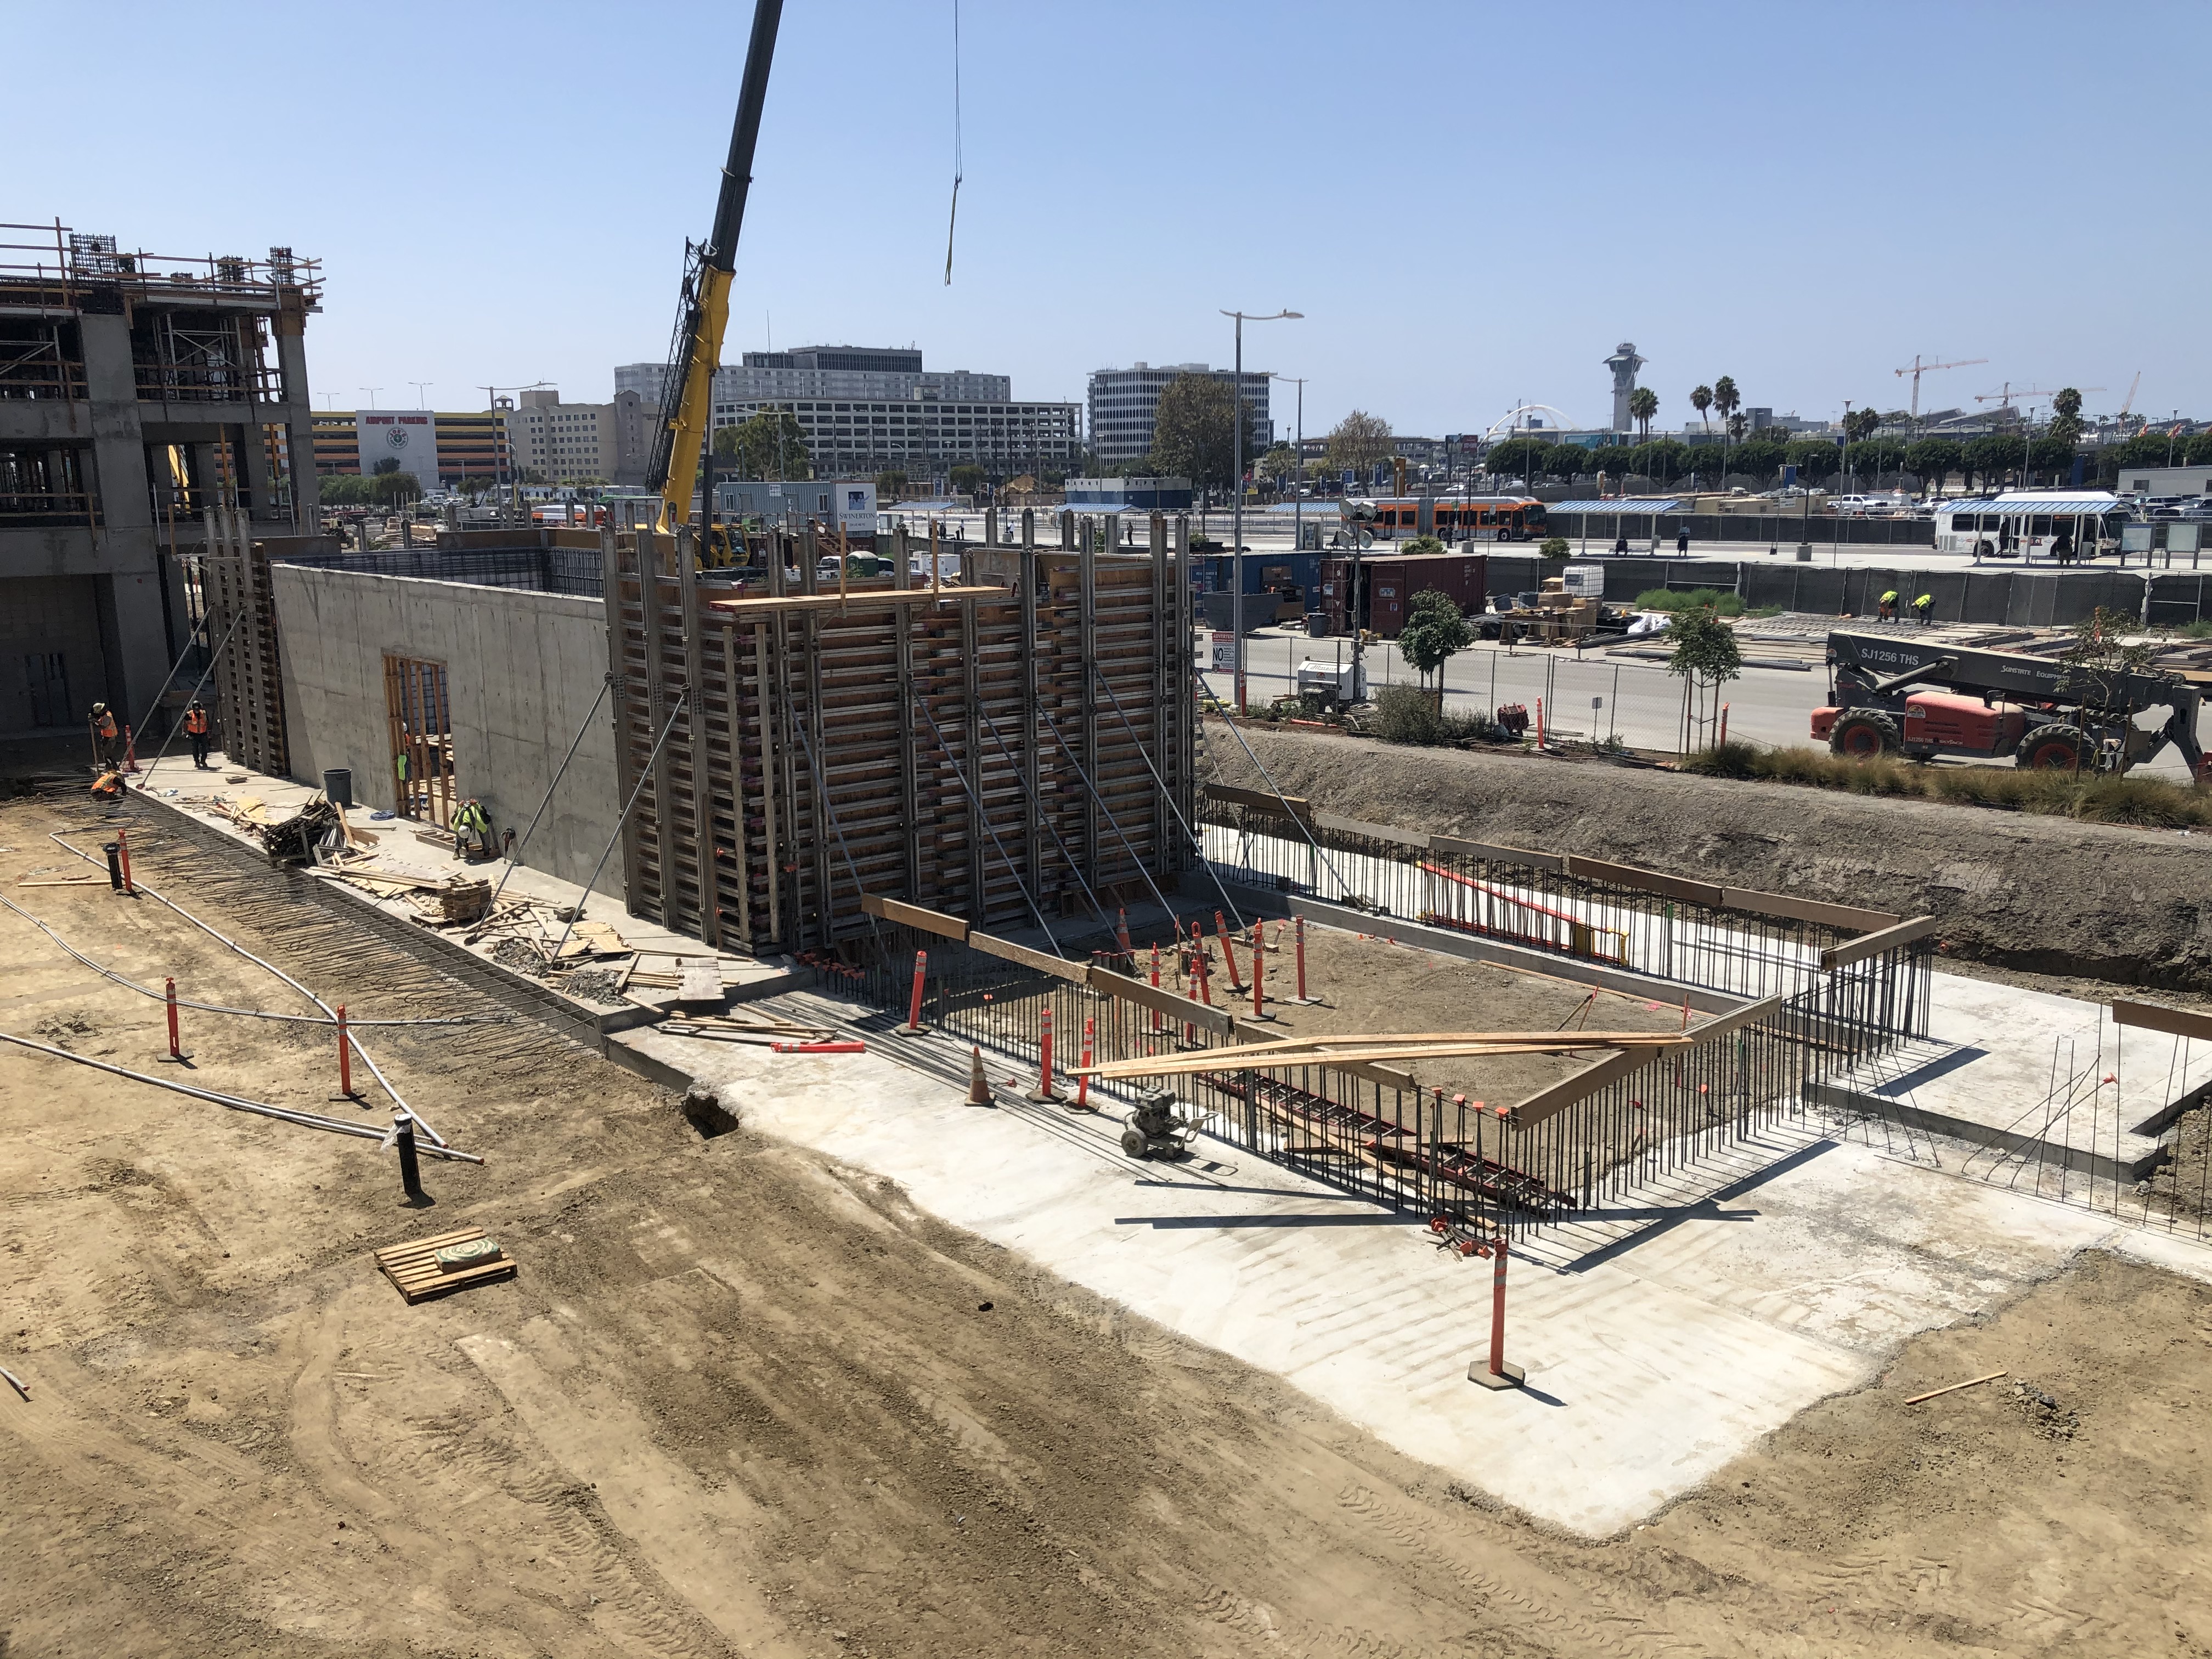 Construction of the DWP power station that will help provide power to the Intermodal Transportation Facility-West.